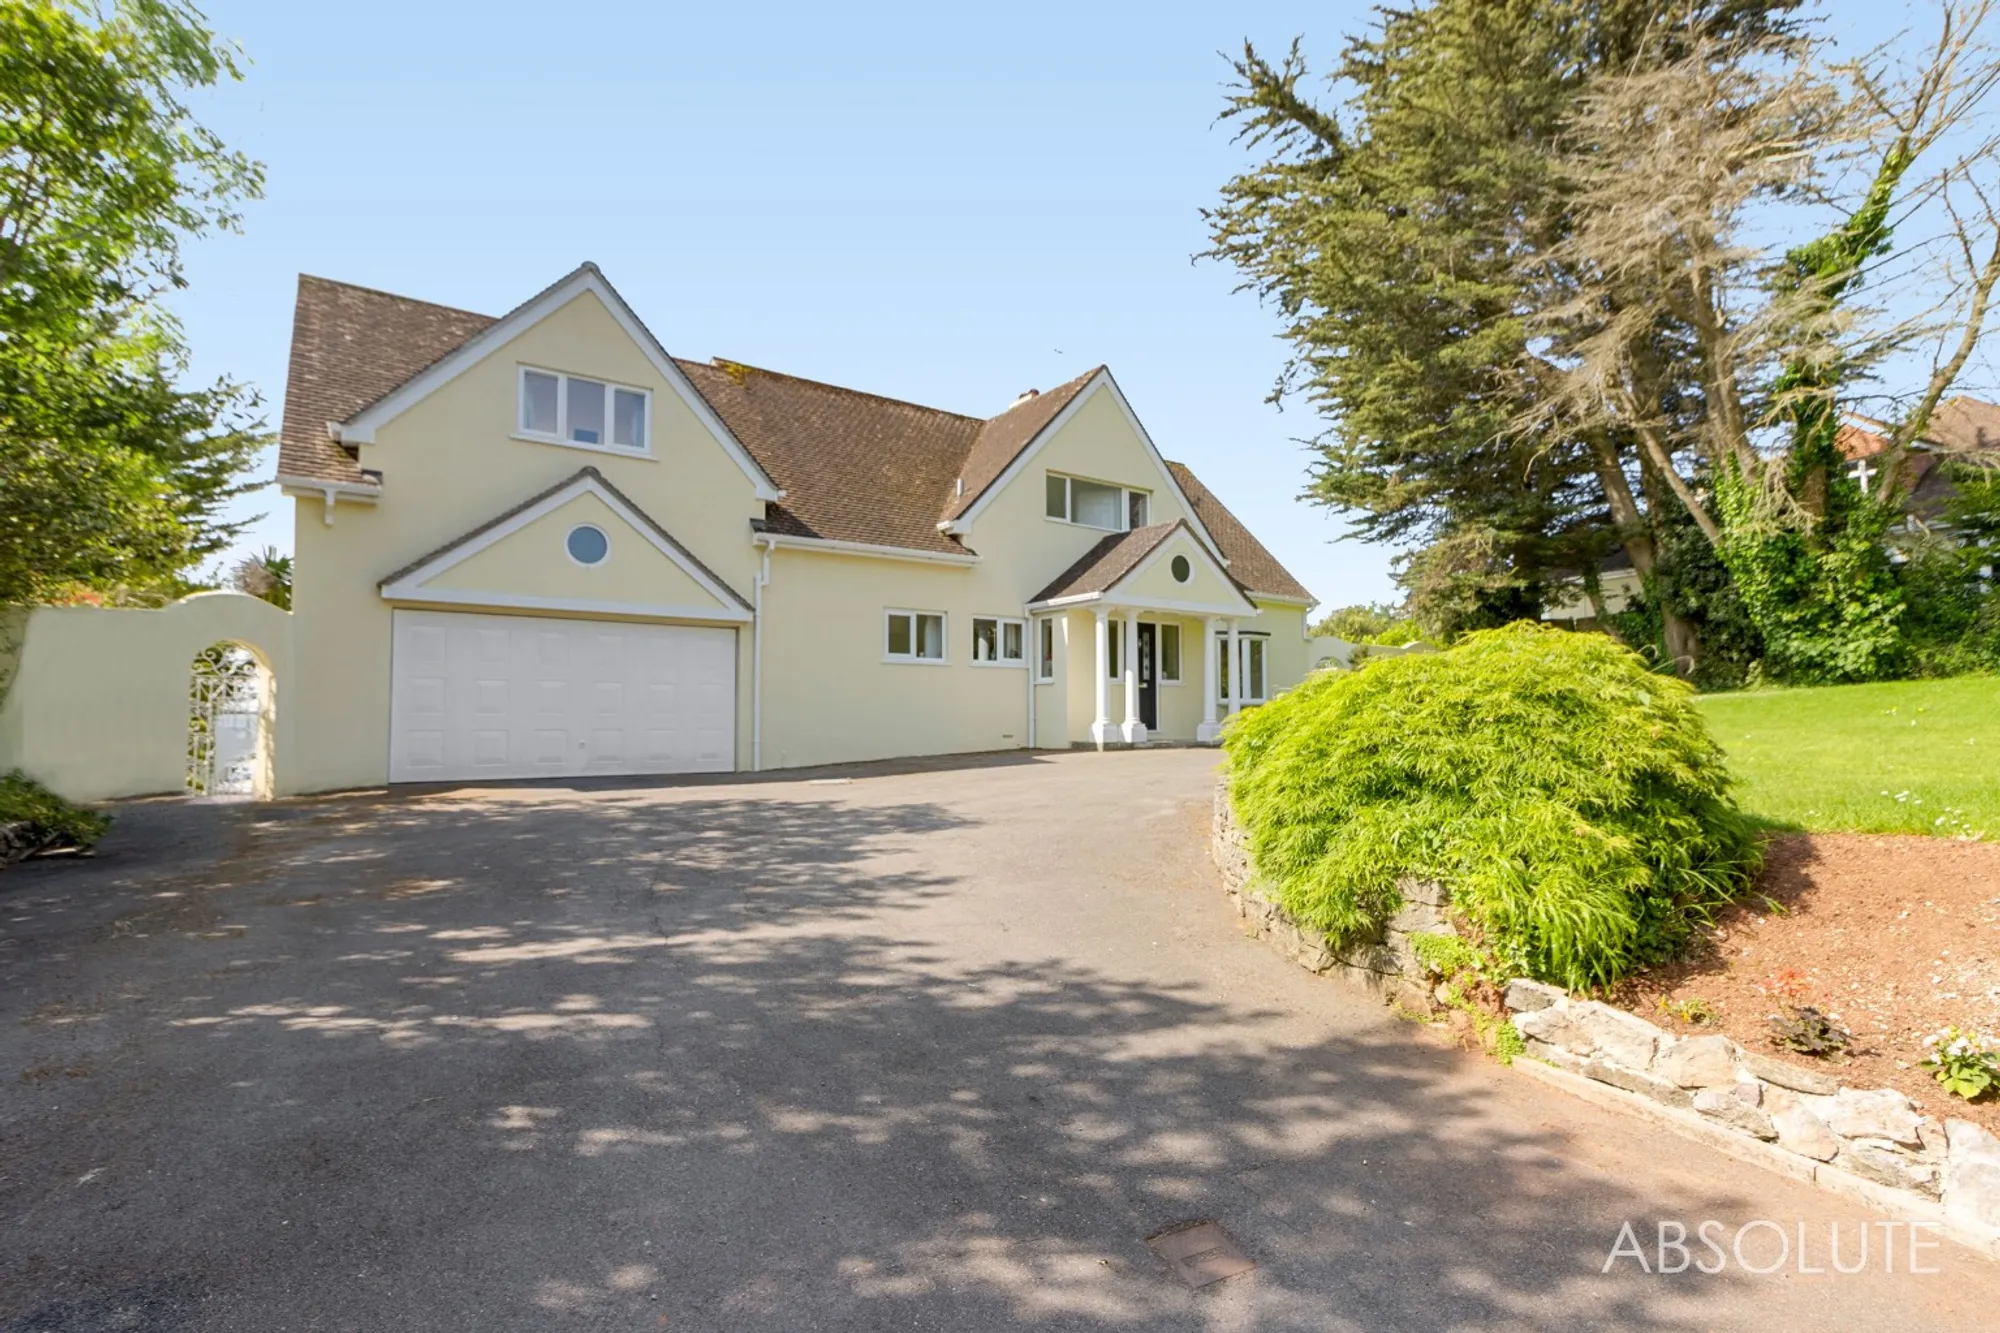 4 bed detached house for sale in Seaway Lane, Torquay - Property Image 1